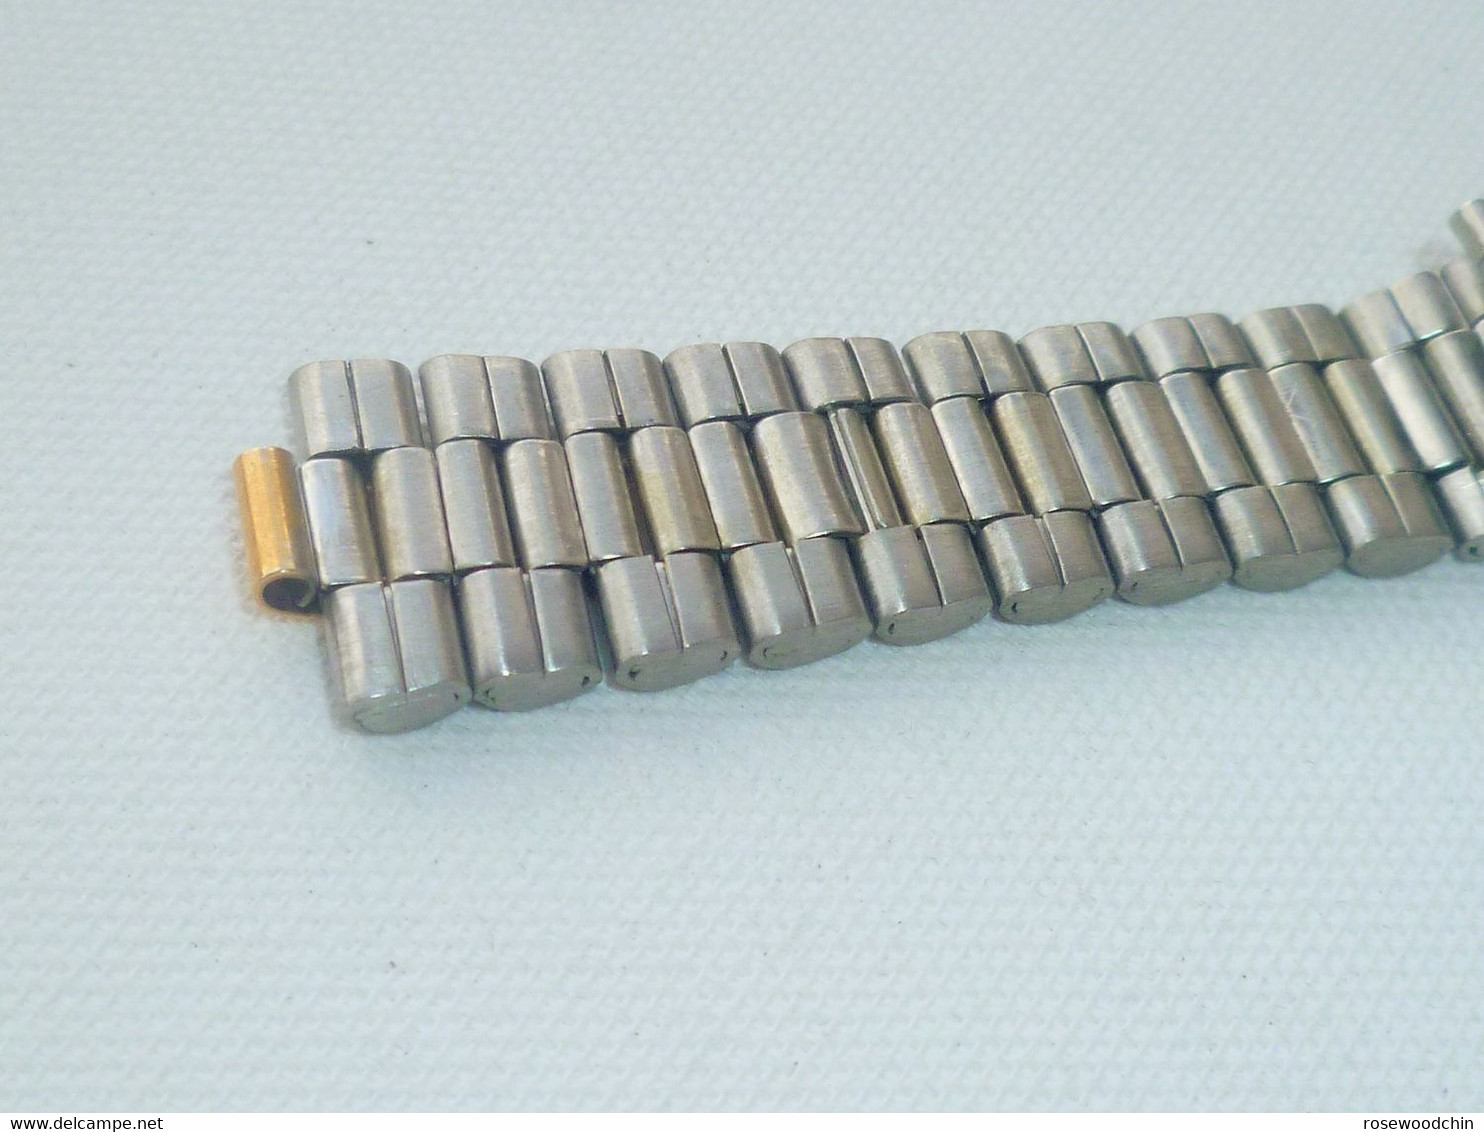 Vintage Gold Tone / Stainless Steel Watch Band Bracelet Lug 18 mm (#57) NEW !